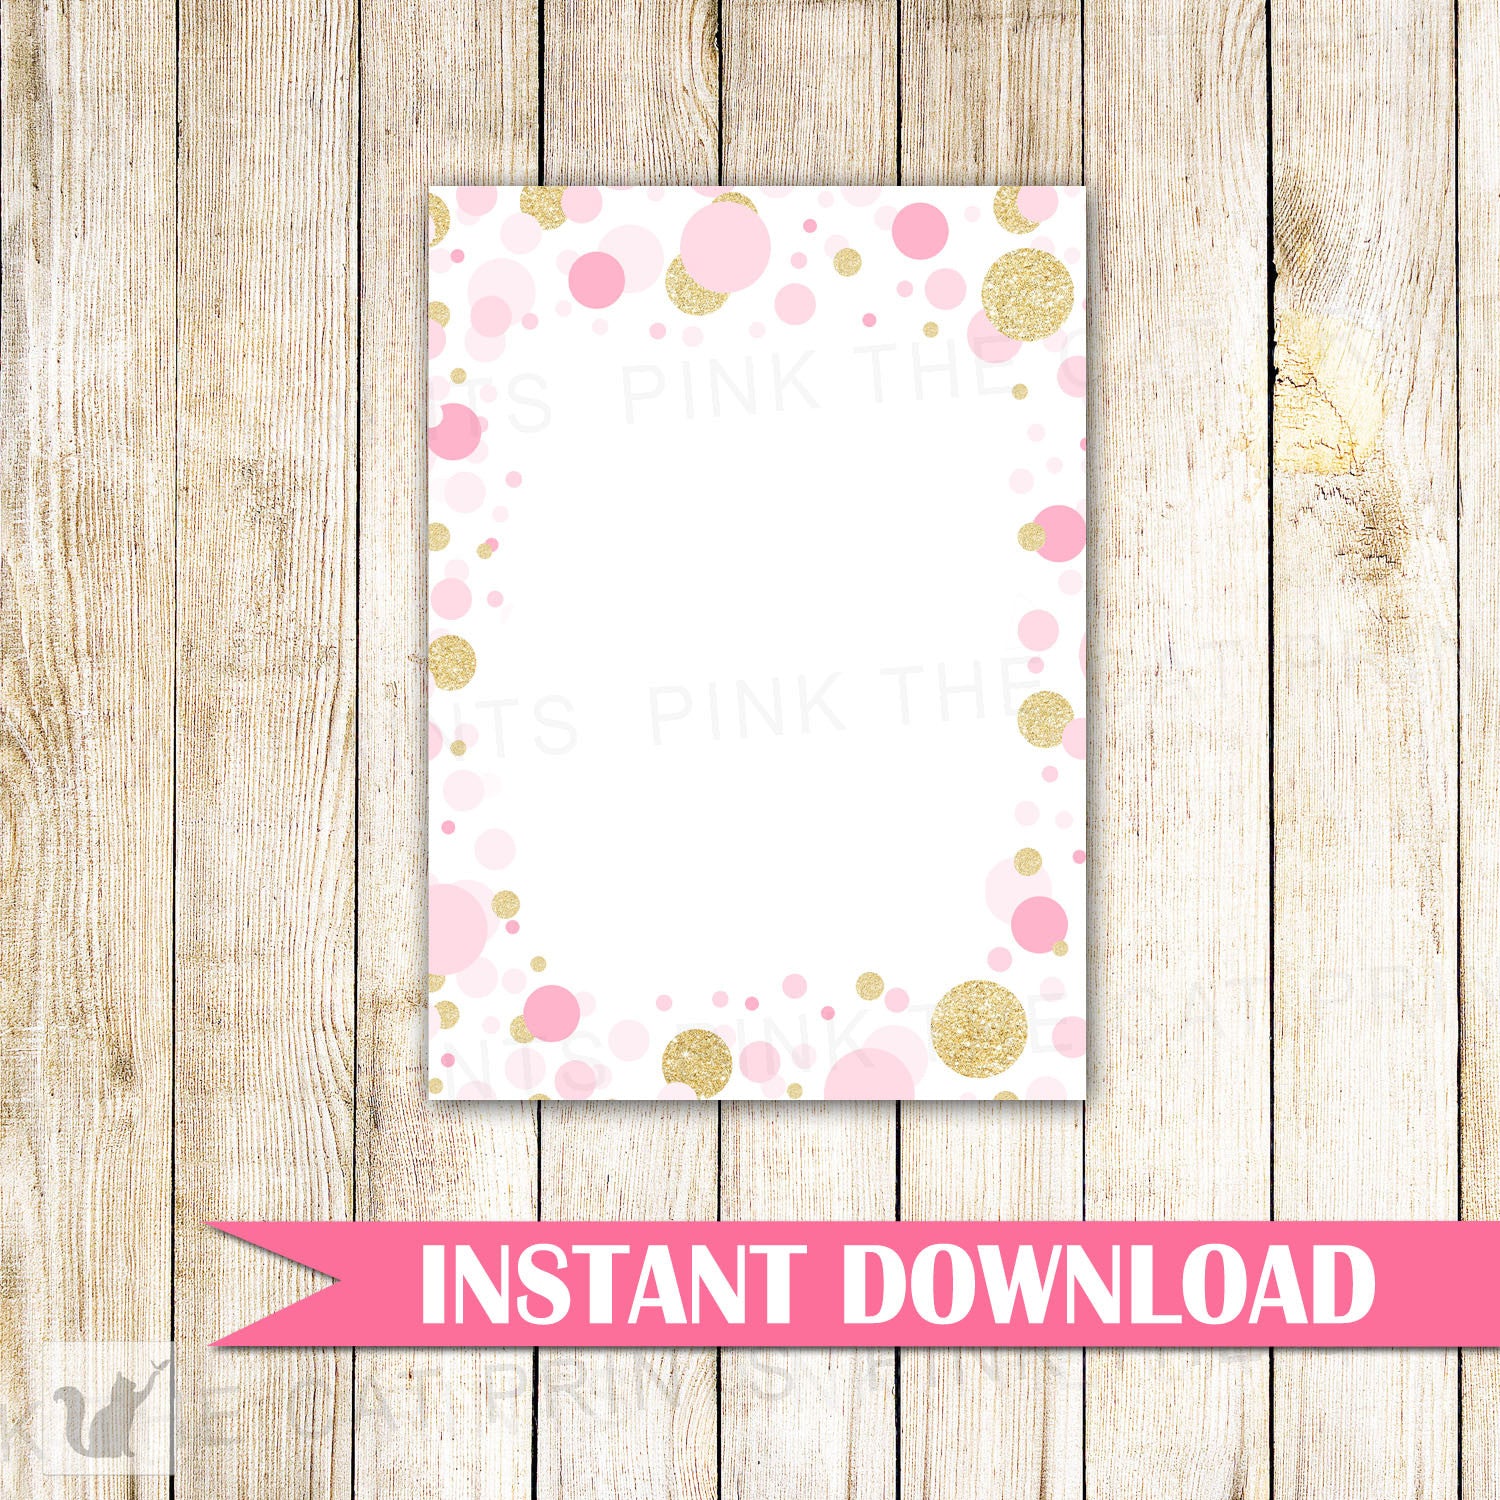 Confetti Blank Card Invitation Thank You Note Gold Glitter Pink